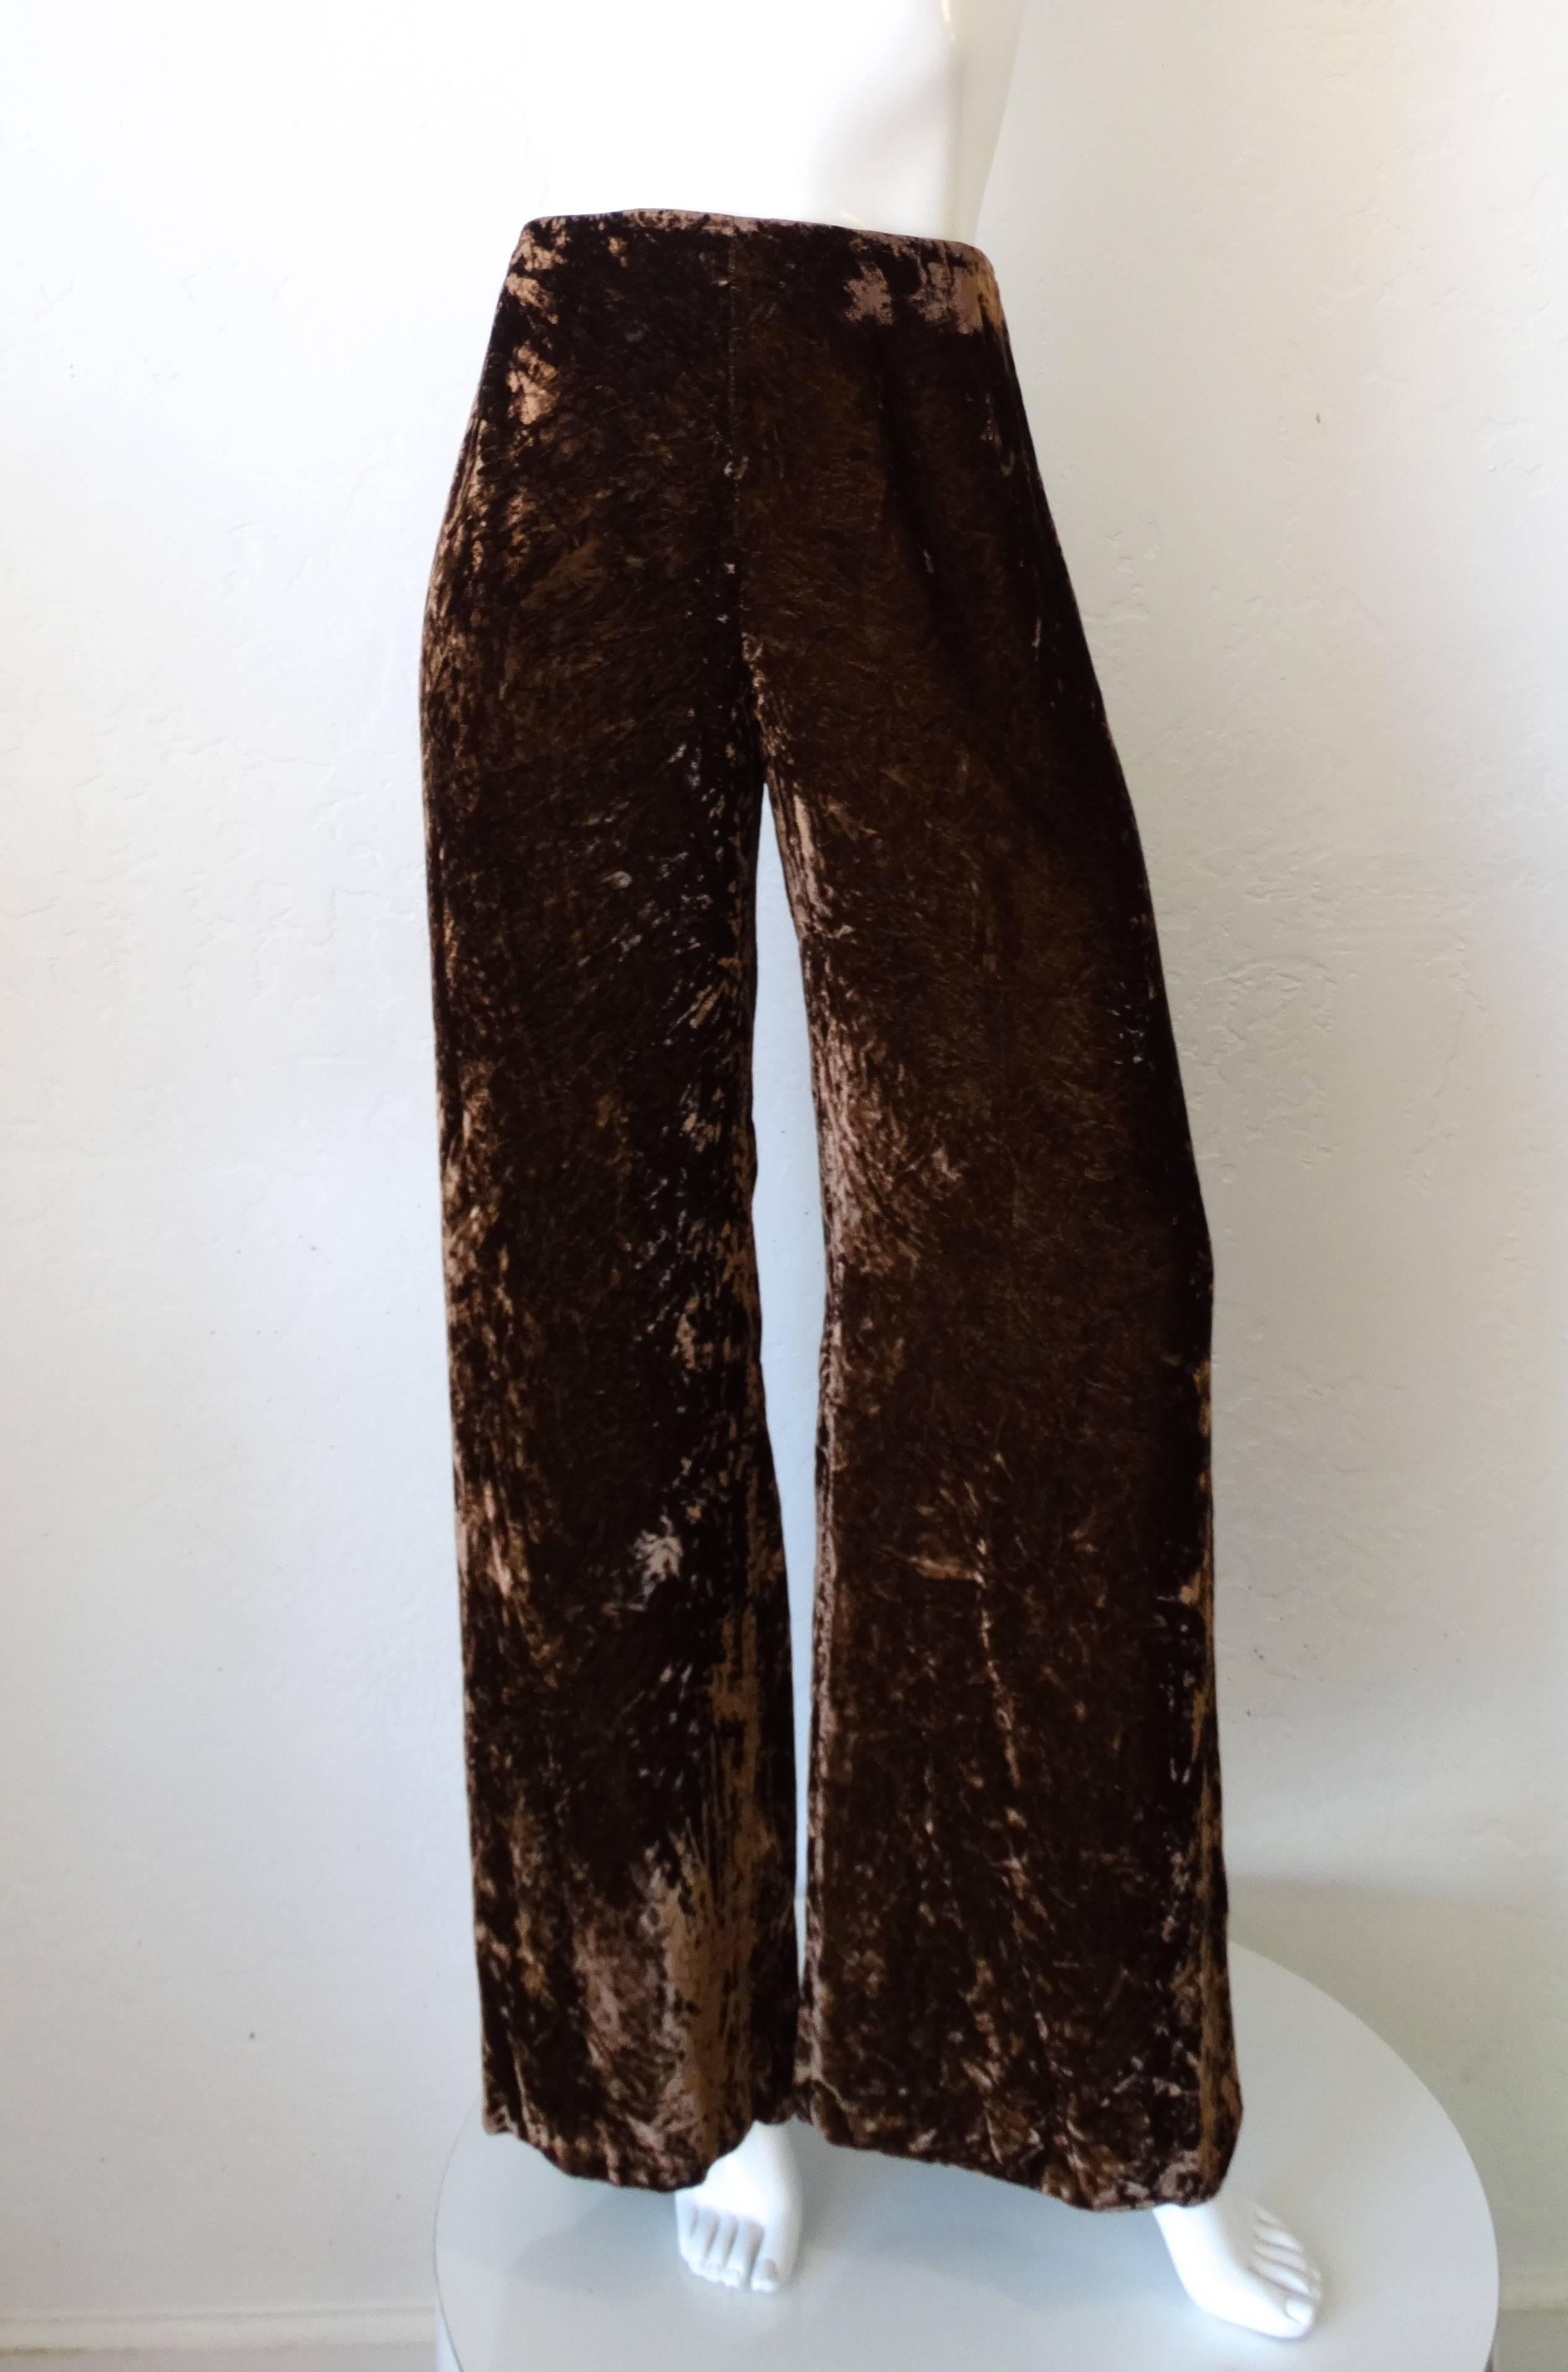 Amazing pair of Gianfranco Ferre pants in a rich chocolate brown velvet! High rise fit with a wide leg silhouette. Super soft crushed velvet in a dark brown color. Pair with a cropped top and a cross body bag for the perfect look this festival